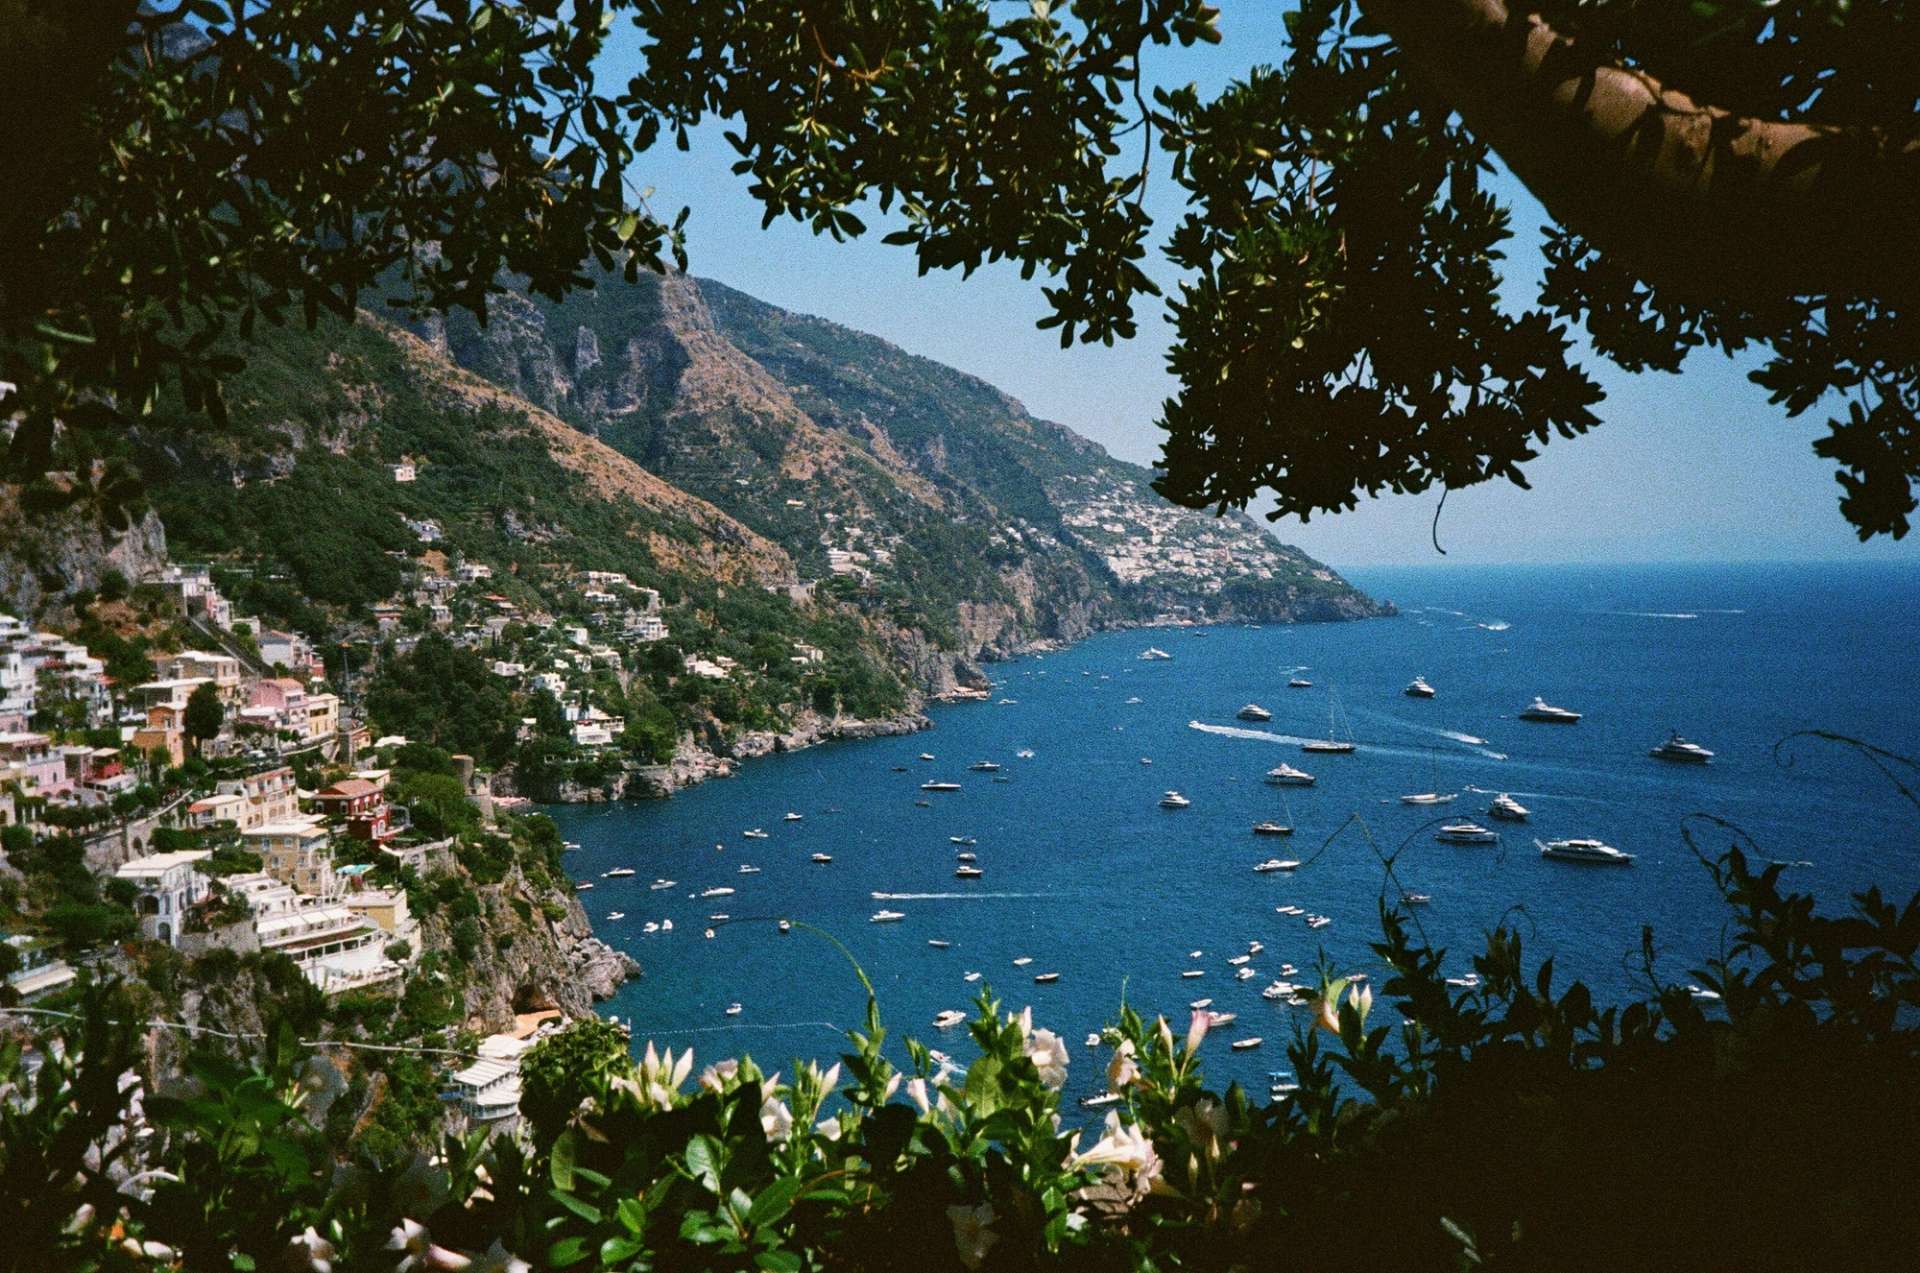 Positano, the perfect destination for a luxury couple's vacation.